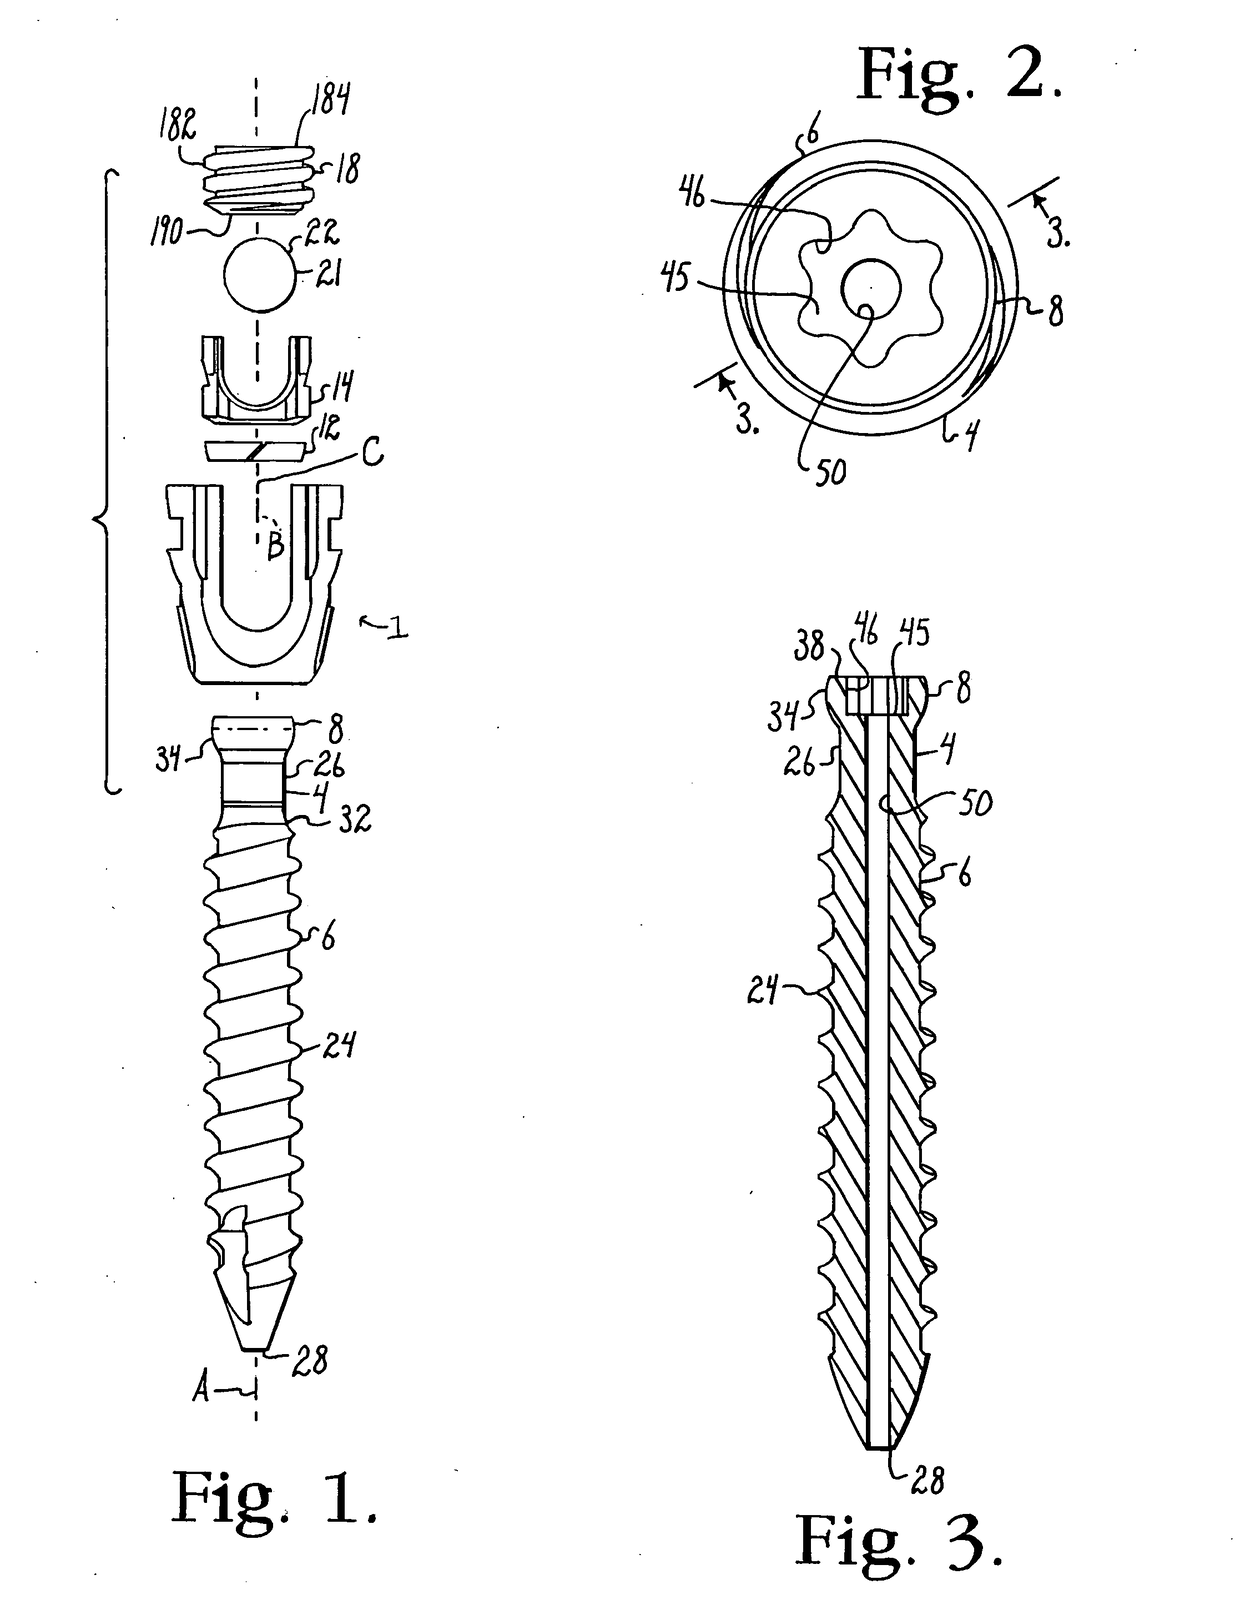 Polyaxial bone anchor with compound articulation and pop-on shank